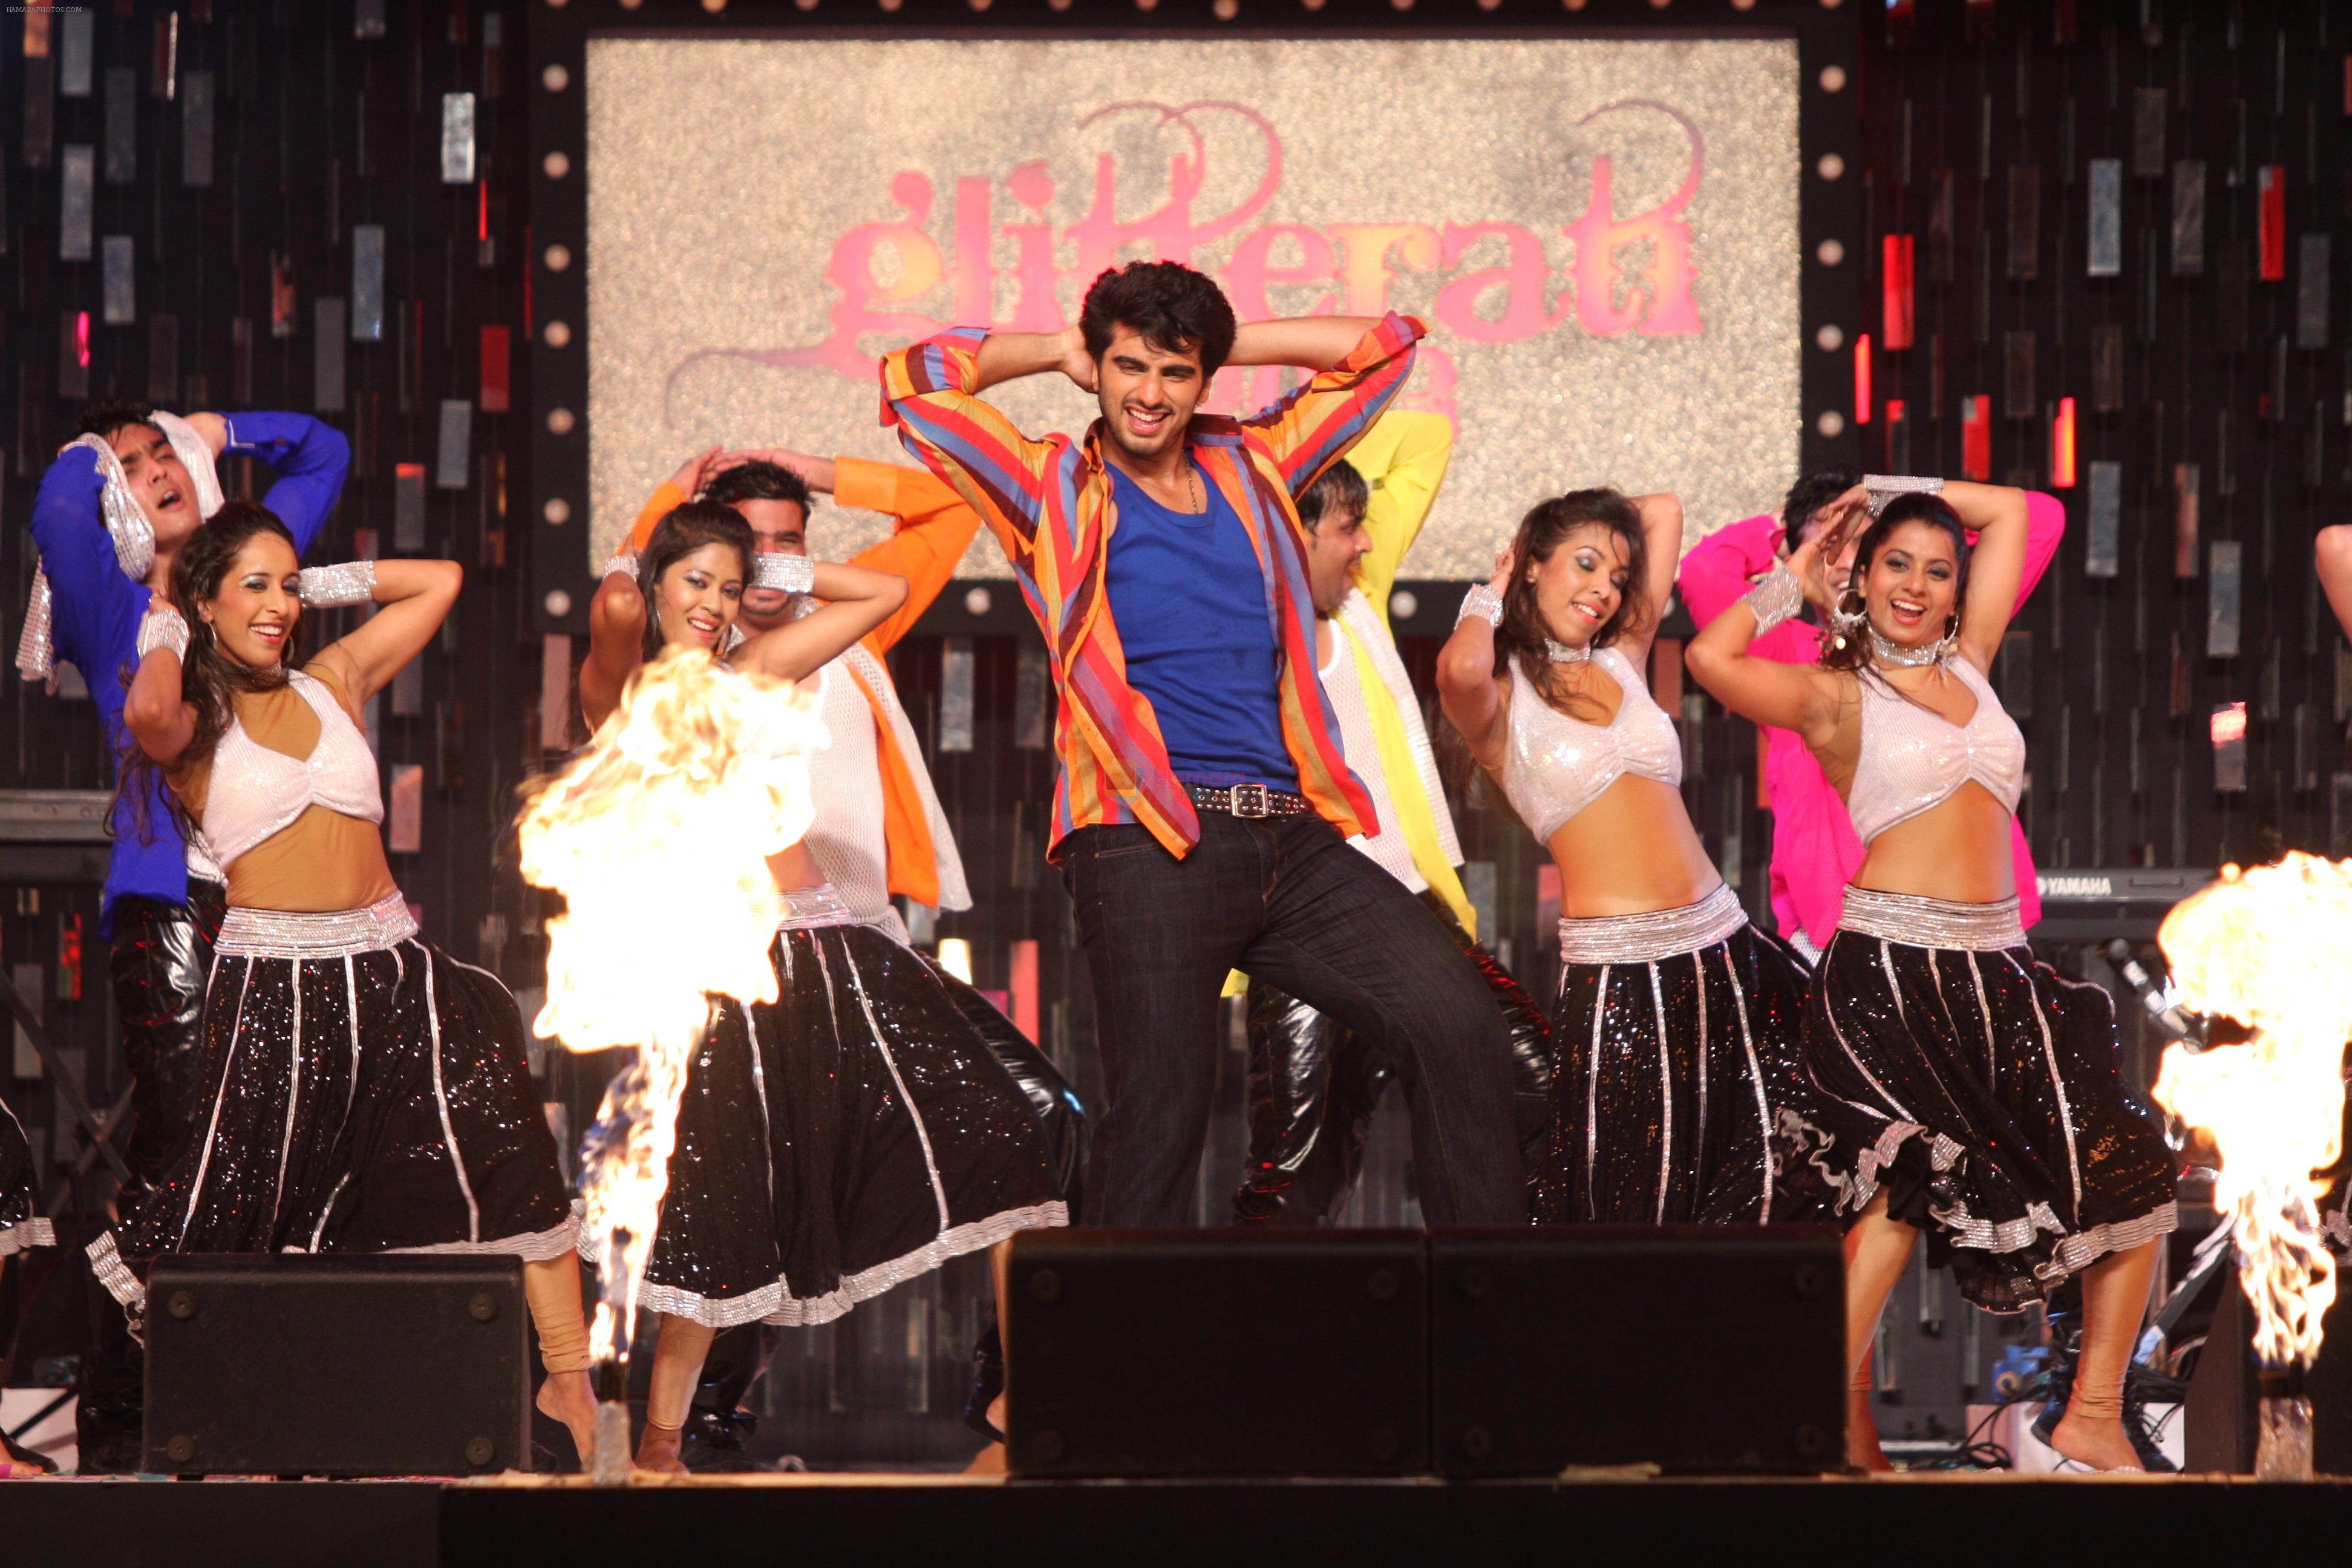 Arjun Kapoor perform for New Years on 31st Dec 2012